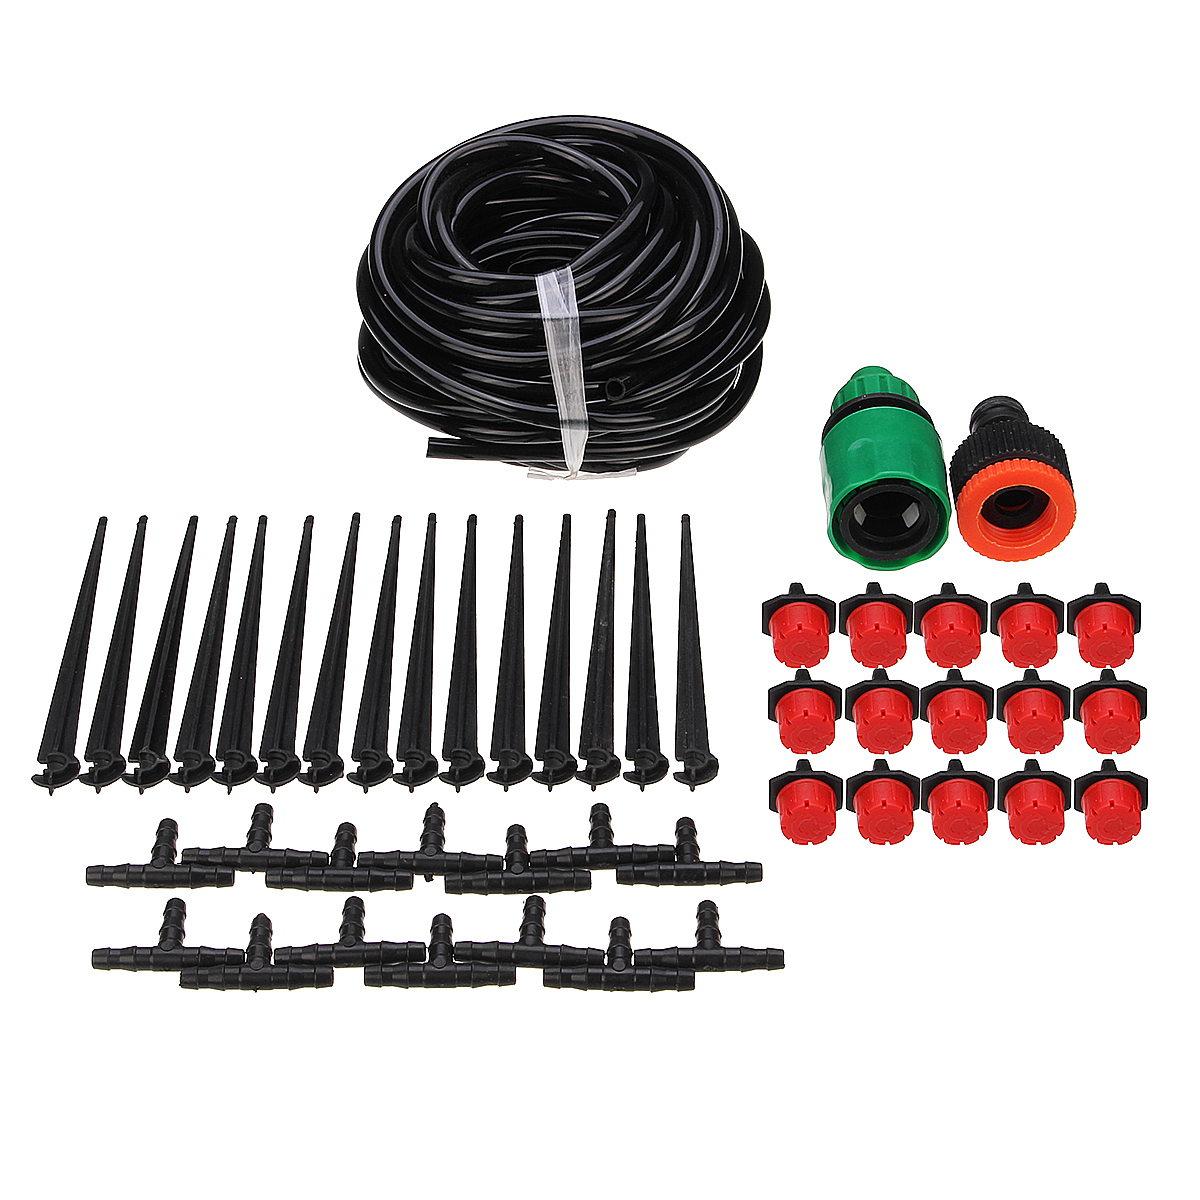 

47PCS Drip Irrigation Greenhouse Garden Plant Watering System Hose Kits Adjusted